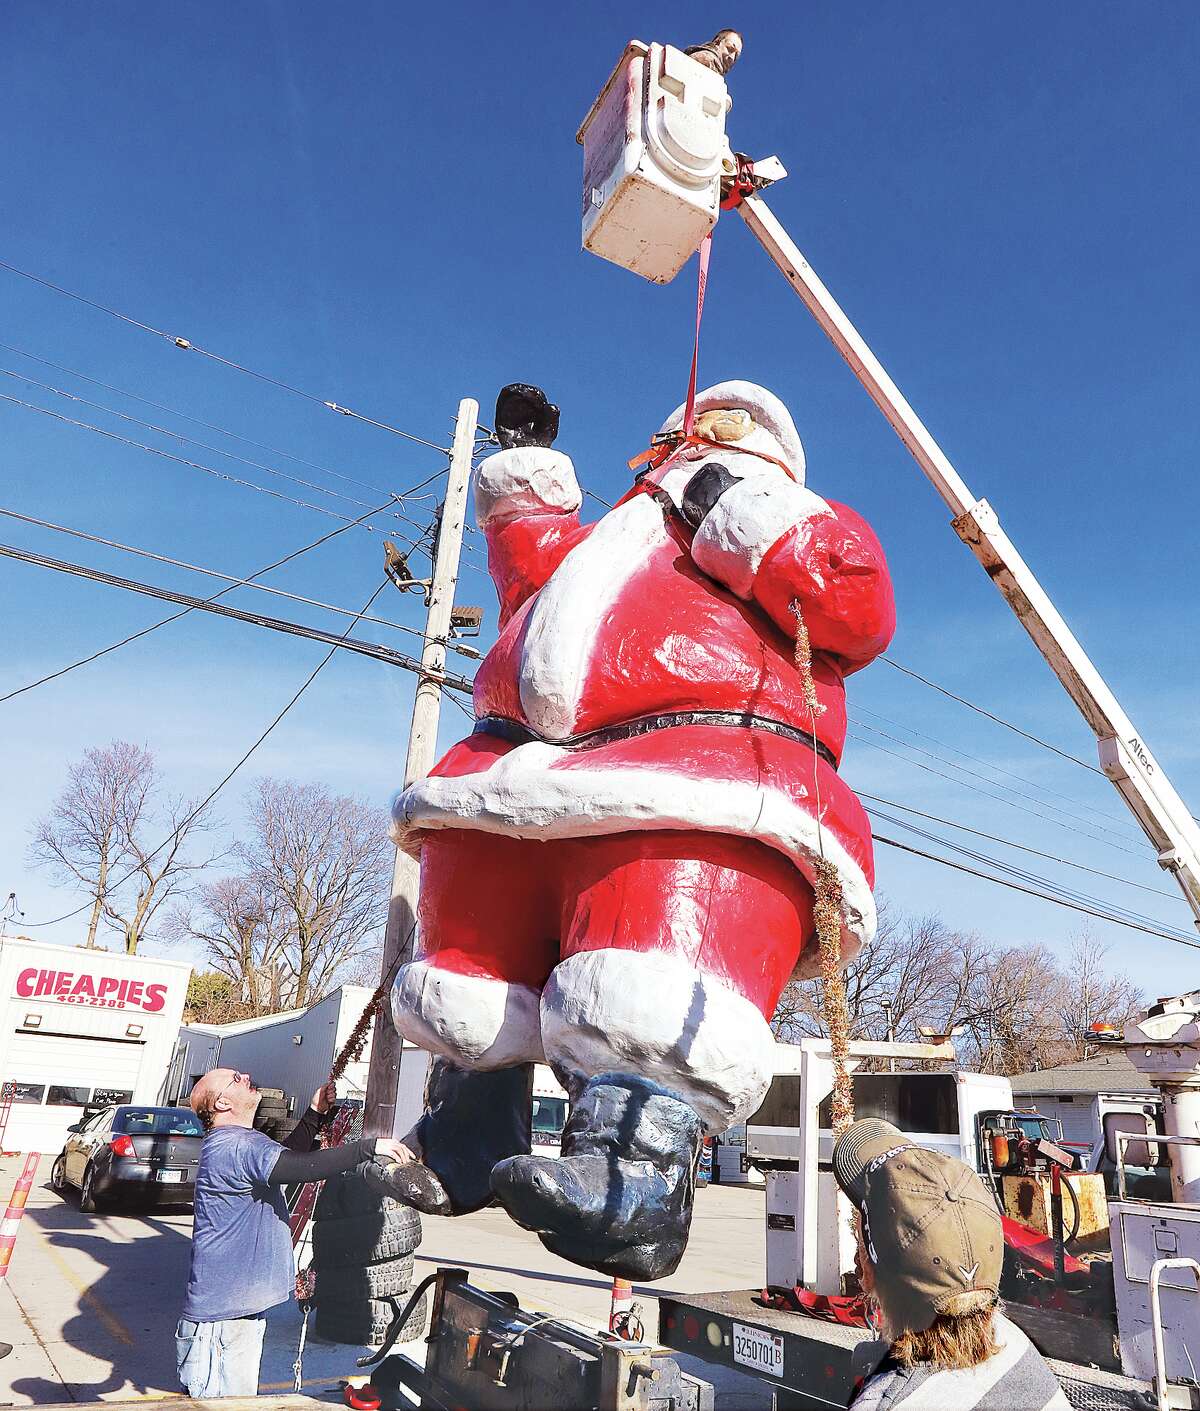 John Badman|The Telegraph Santa Claus couldn't escape being strung up this week in front of Cheapies tires, 3202 East Broadway in Alton. The large fiberglass figure, which has been around the area for decades, was being taken down for the season and placed on a flatbed trailer to head for storage. Employees guided the figure onto the trailer with help from Carl Dagnese and his bucket truck. During the off season, workers said Santa was going to receive some needed repairs and be repainted before he returns in December.